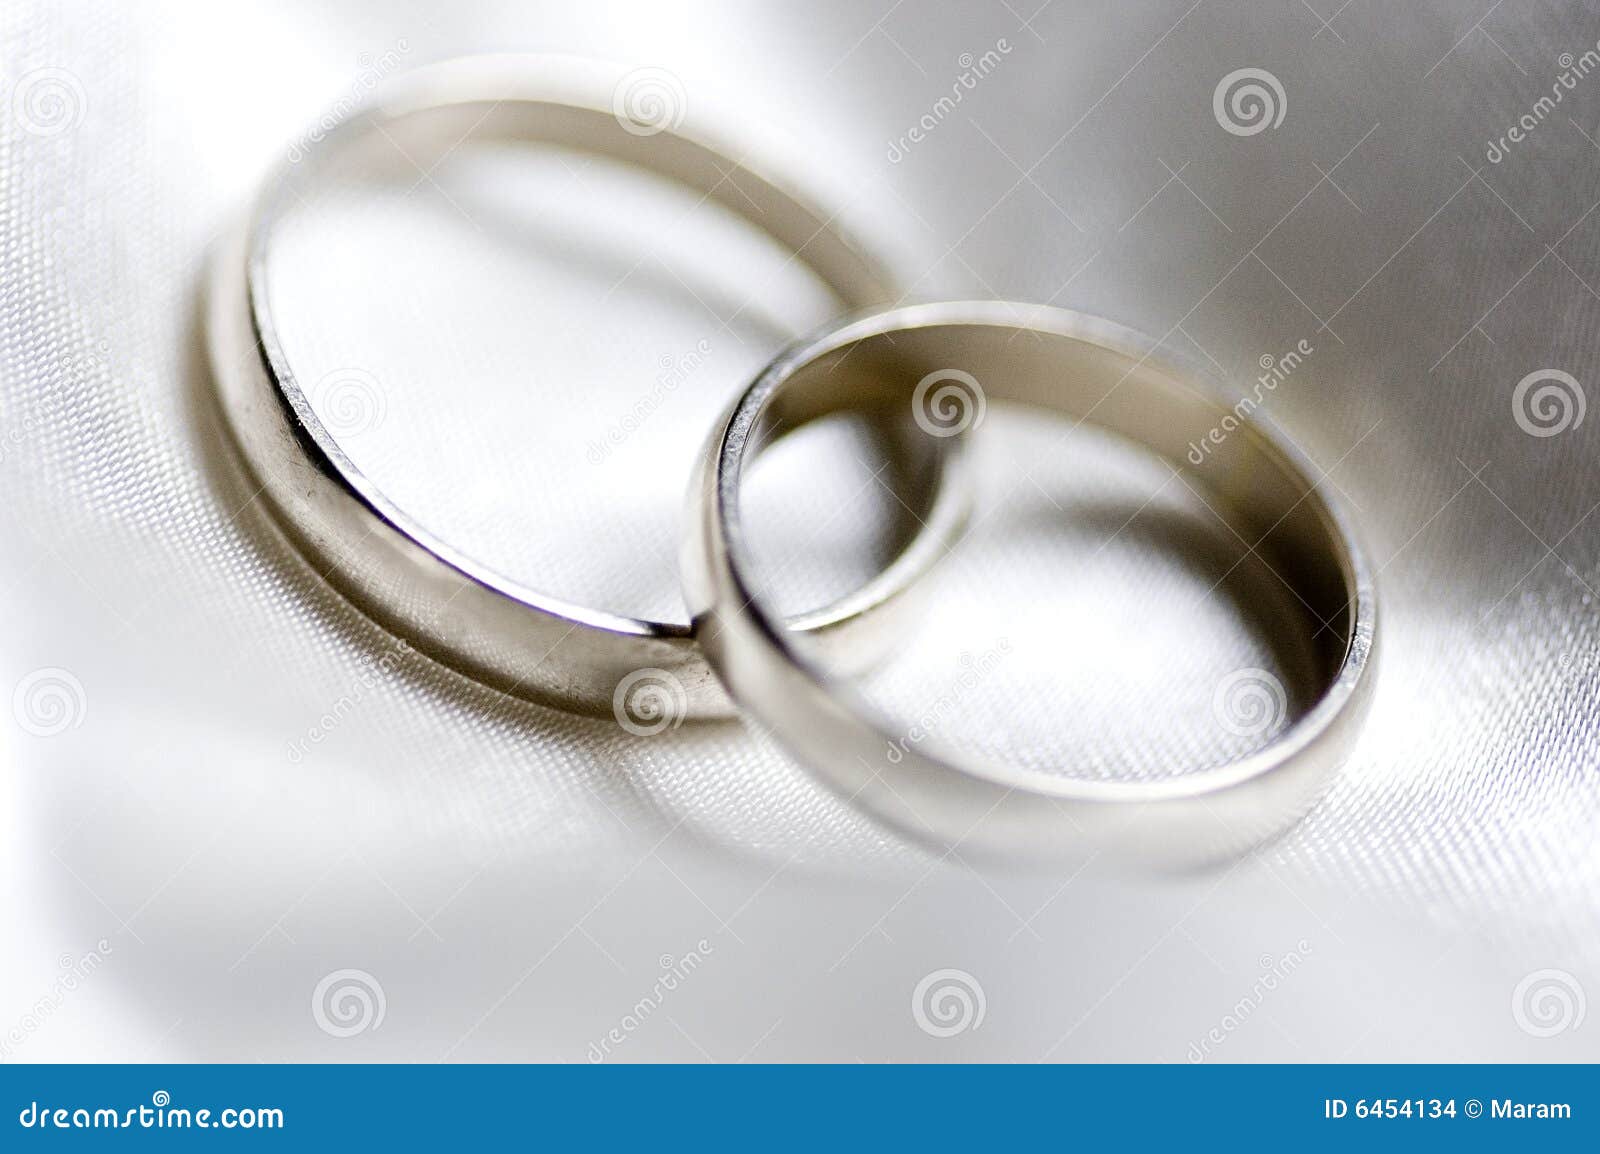 Two silver wedding rings on a white texture.